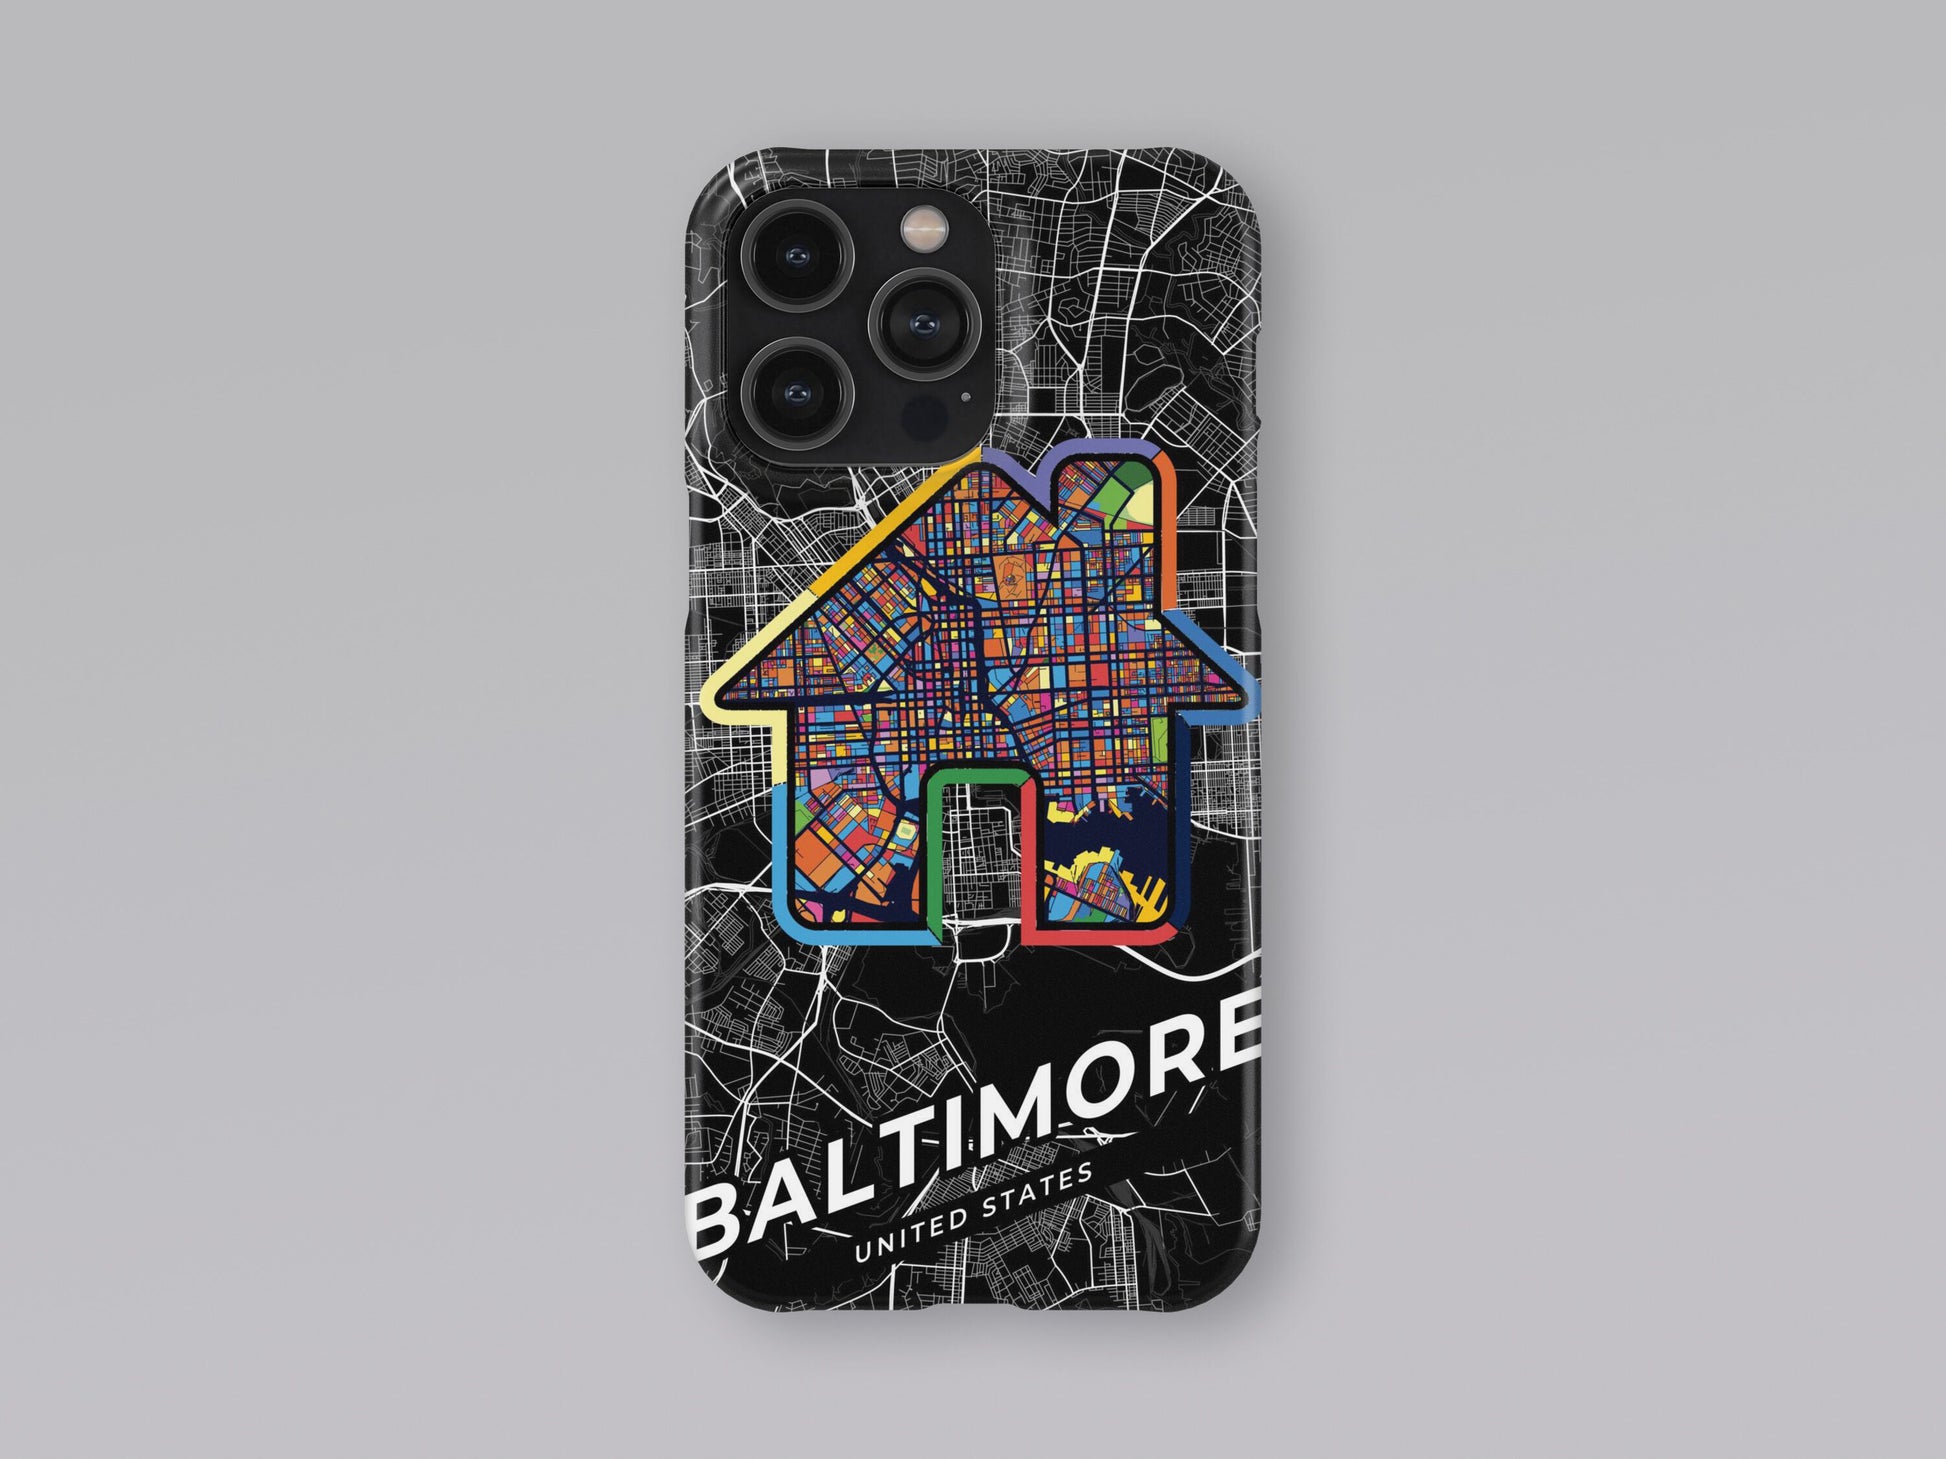 Baltimore Maryland slim phone case with colorful icon. Birthday, wedding or housewarming gift. Couple match cases. 3